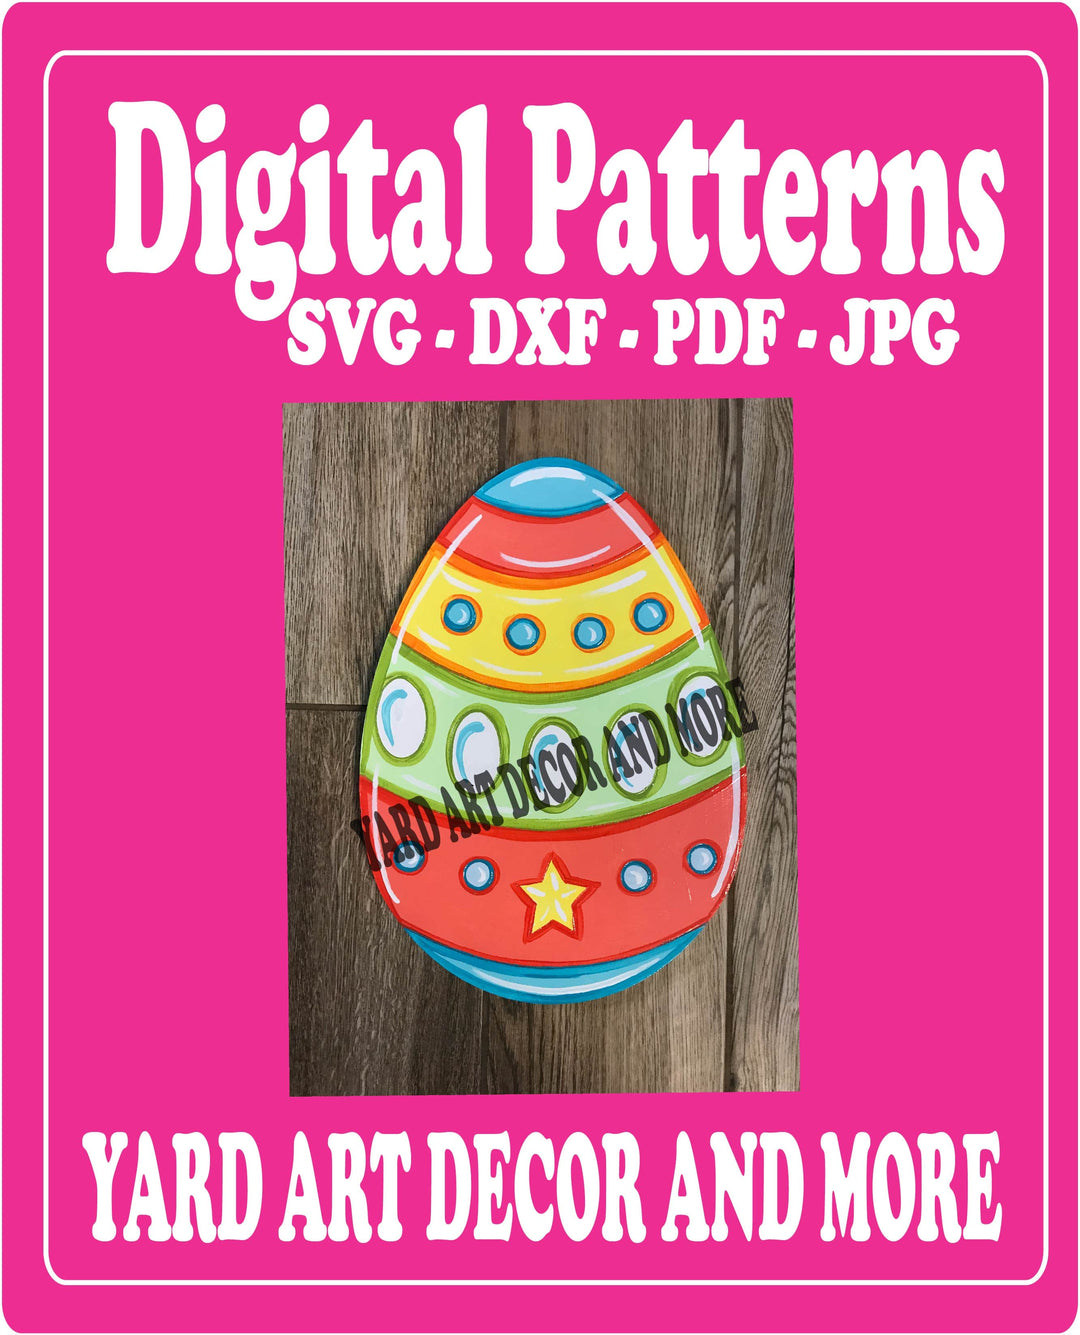 Easter Egg with ovals and star design yard art decor digital template